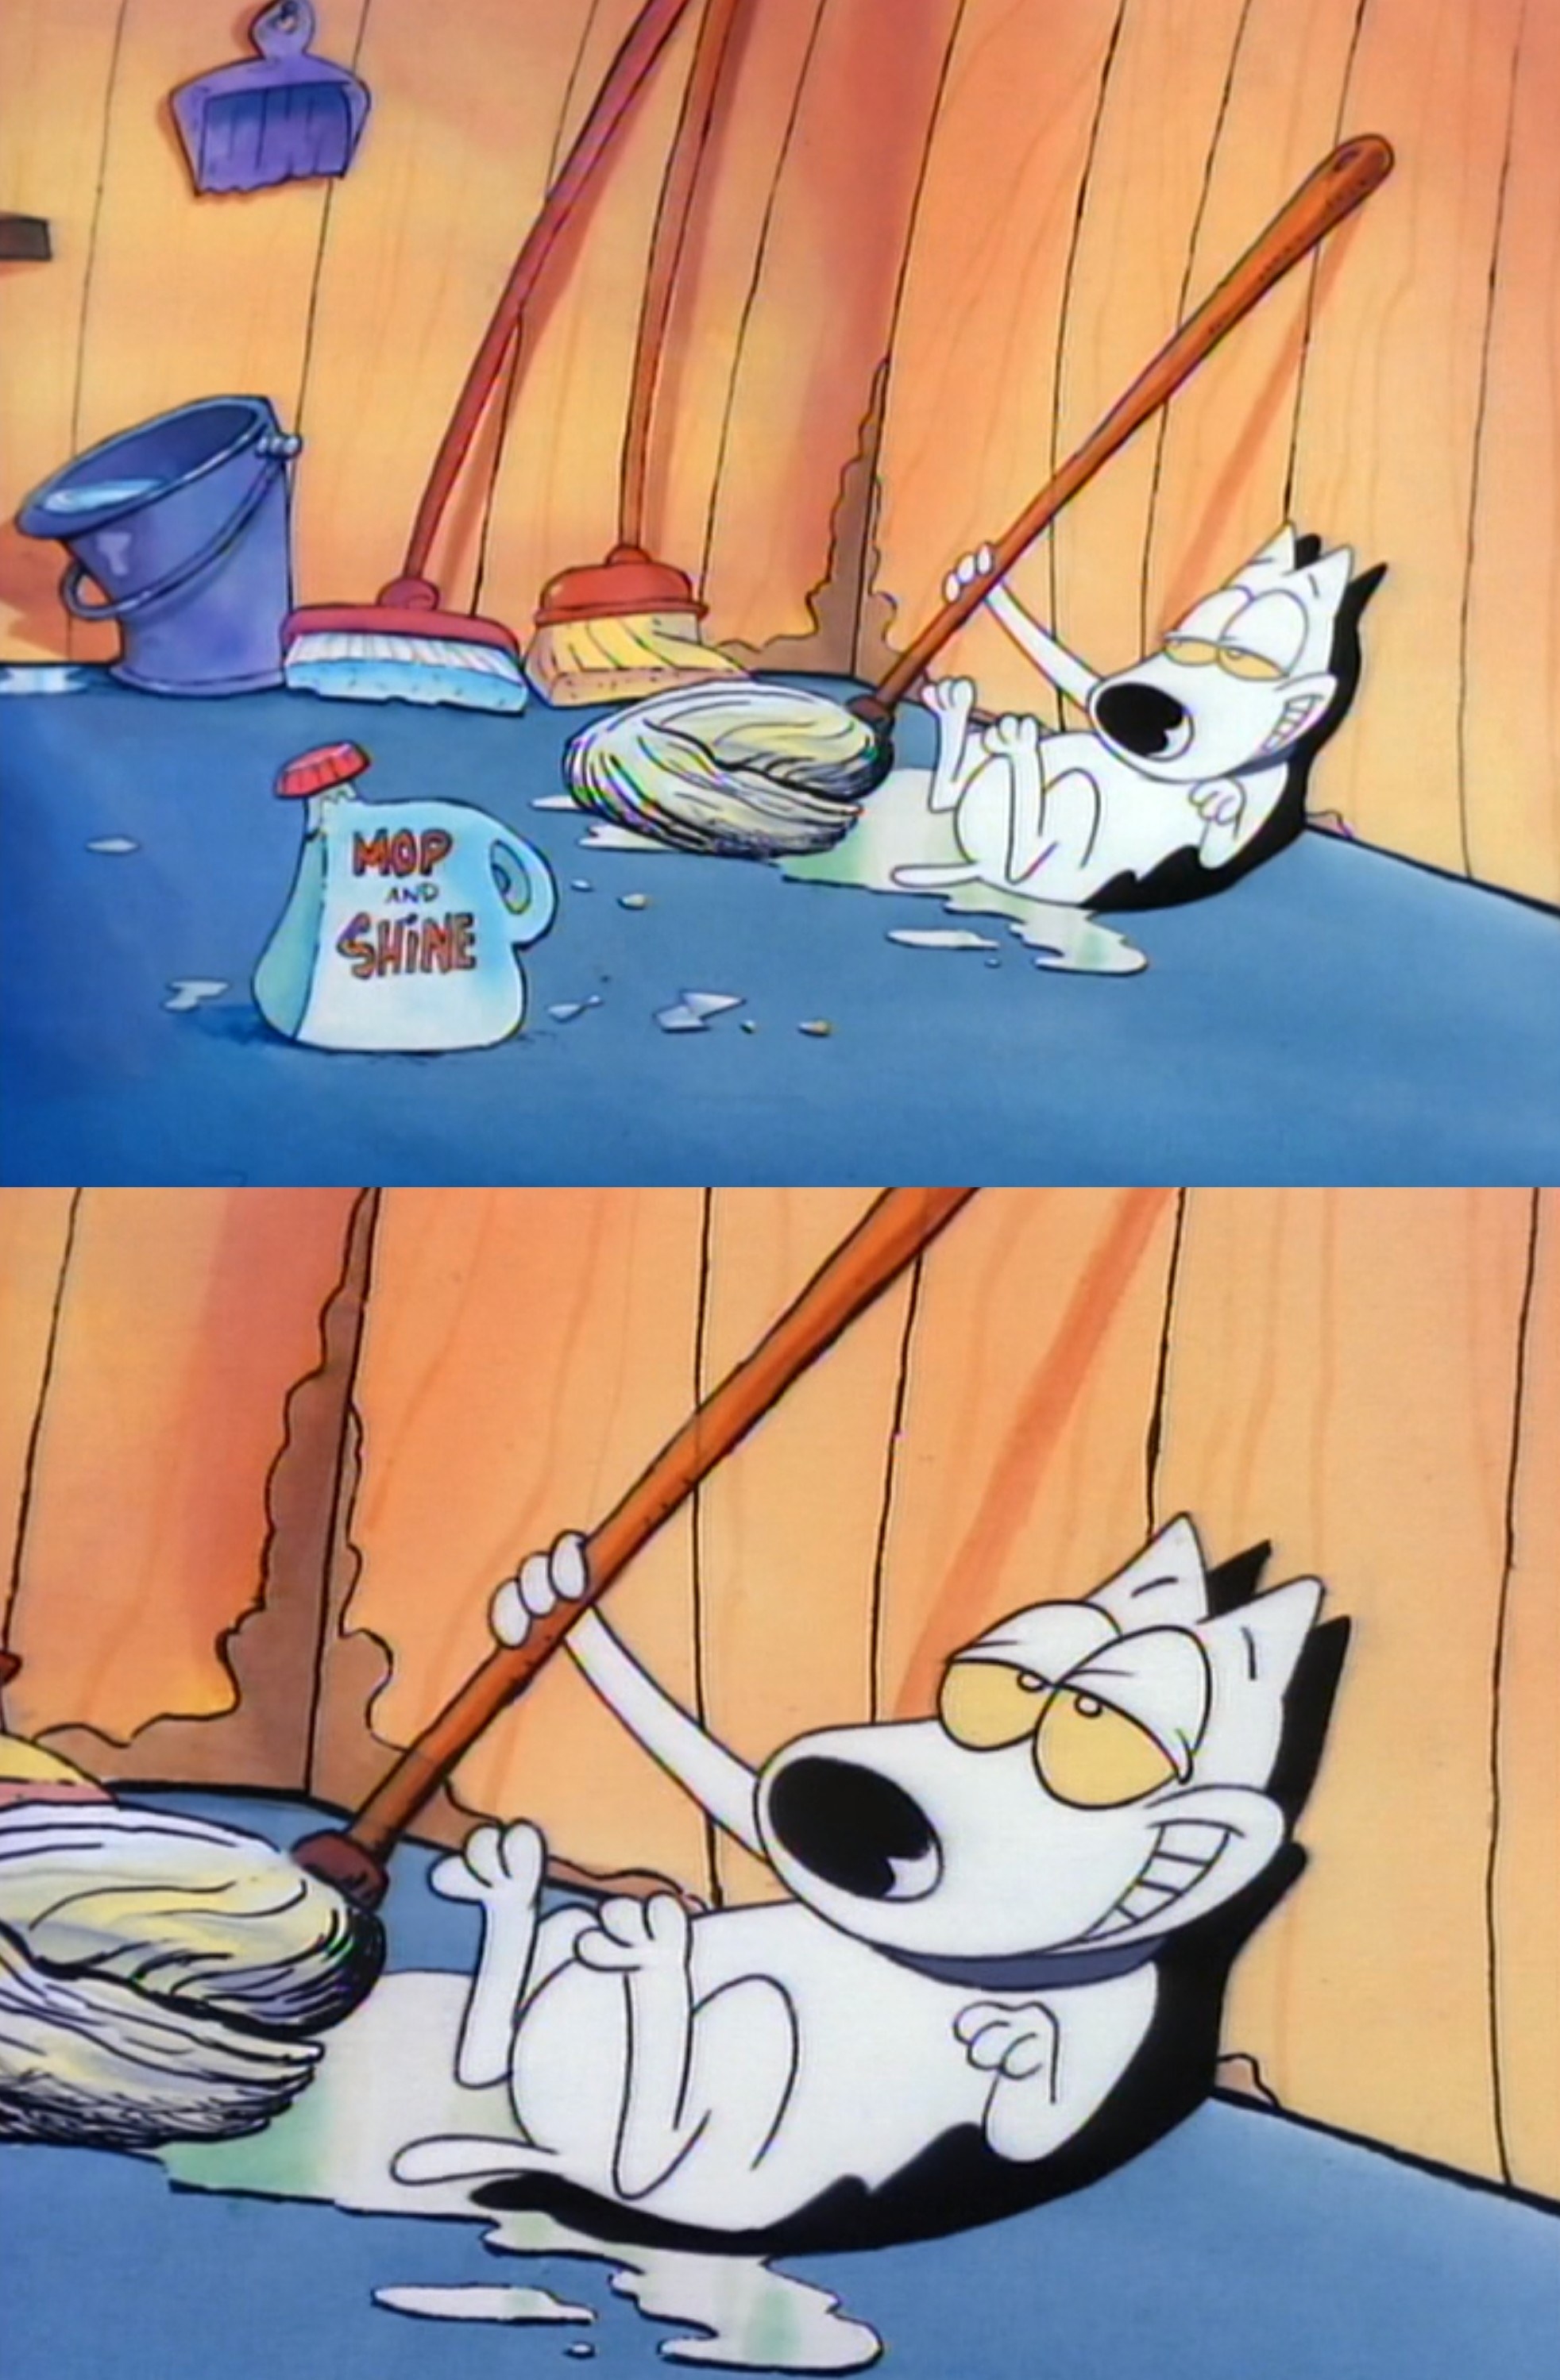 spunky in post-coital bliss with his mop on rocko&#x27;s modern life